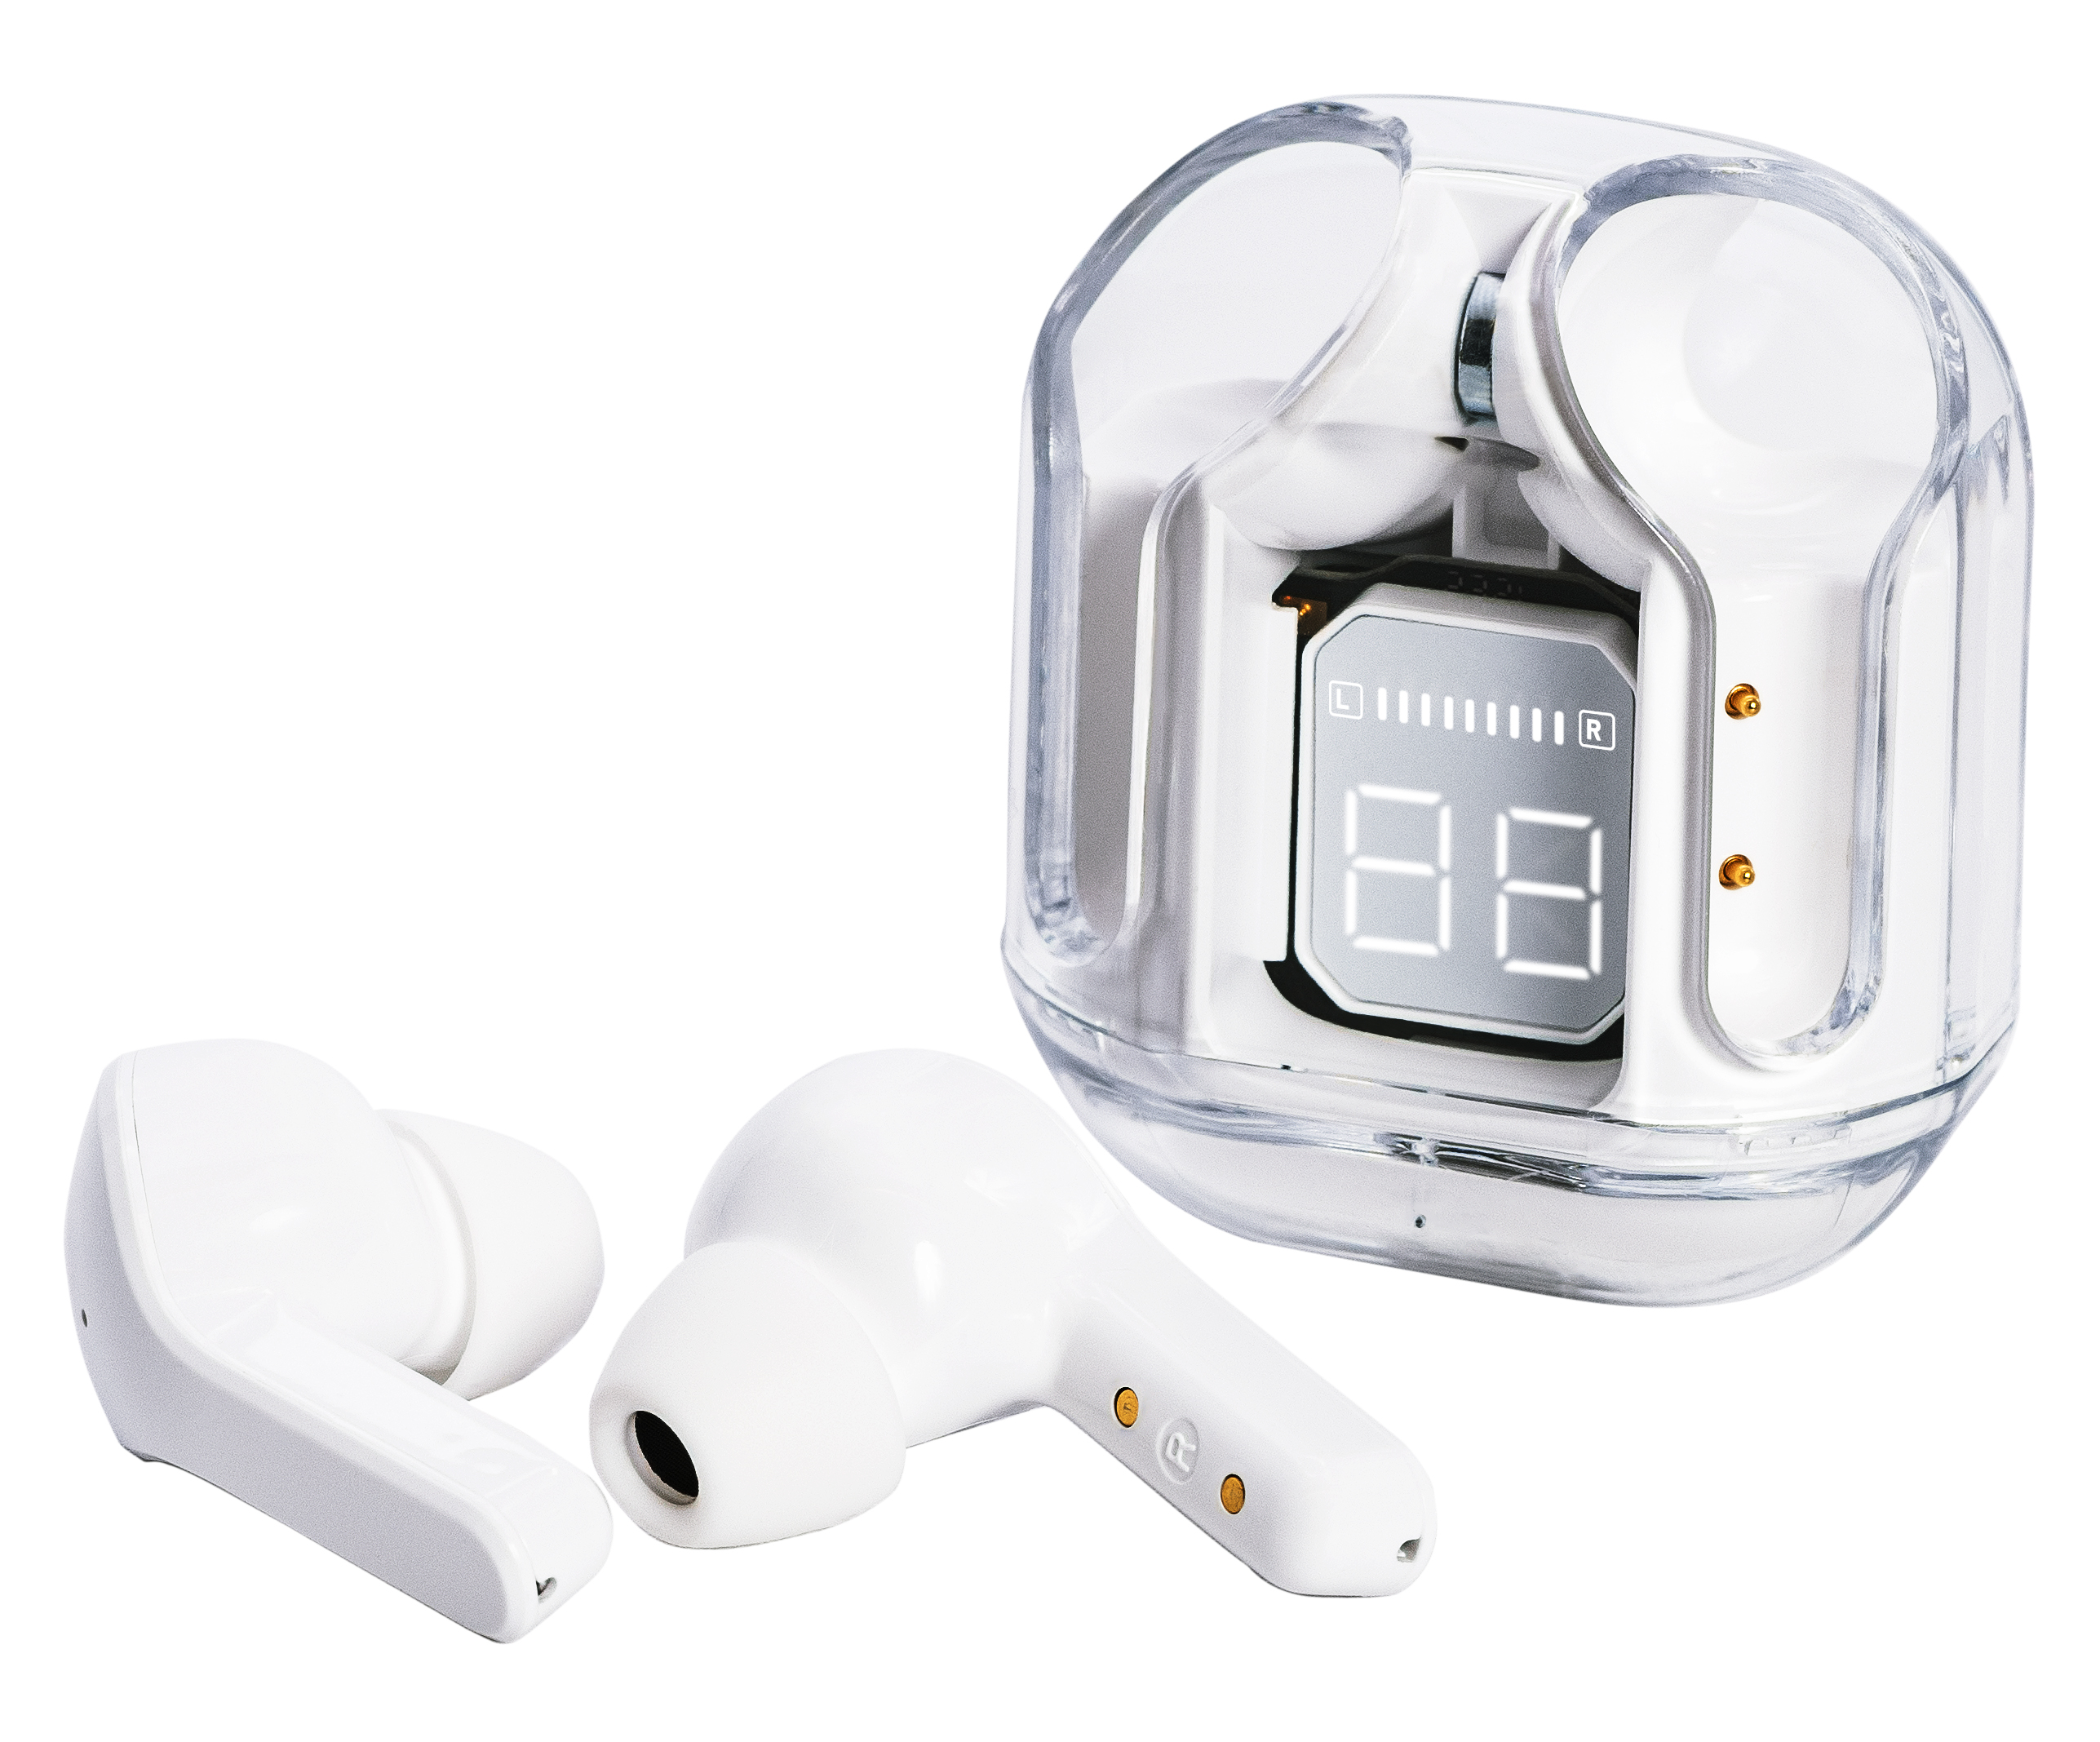 CLUB TWS earphones with telephony function and touch sensor